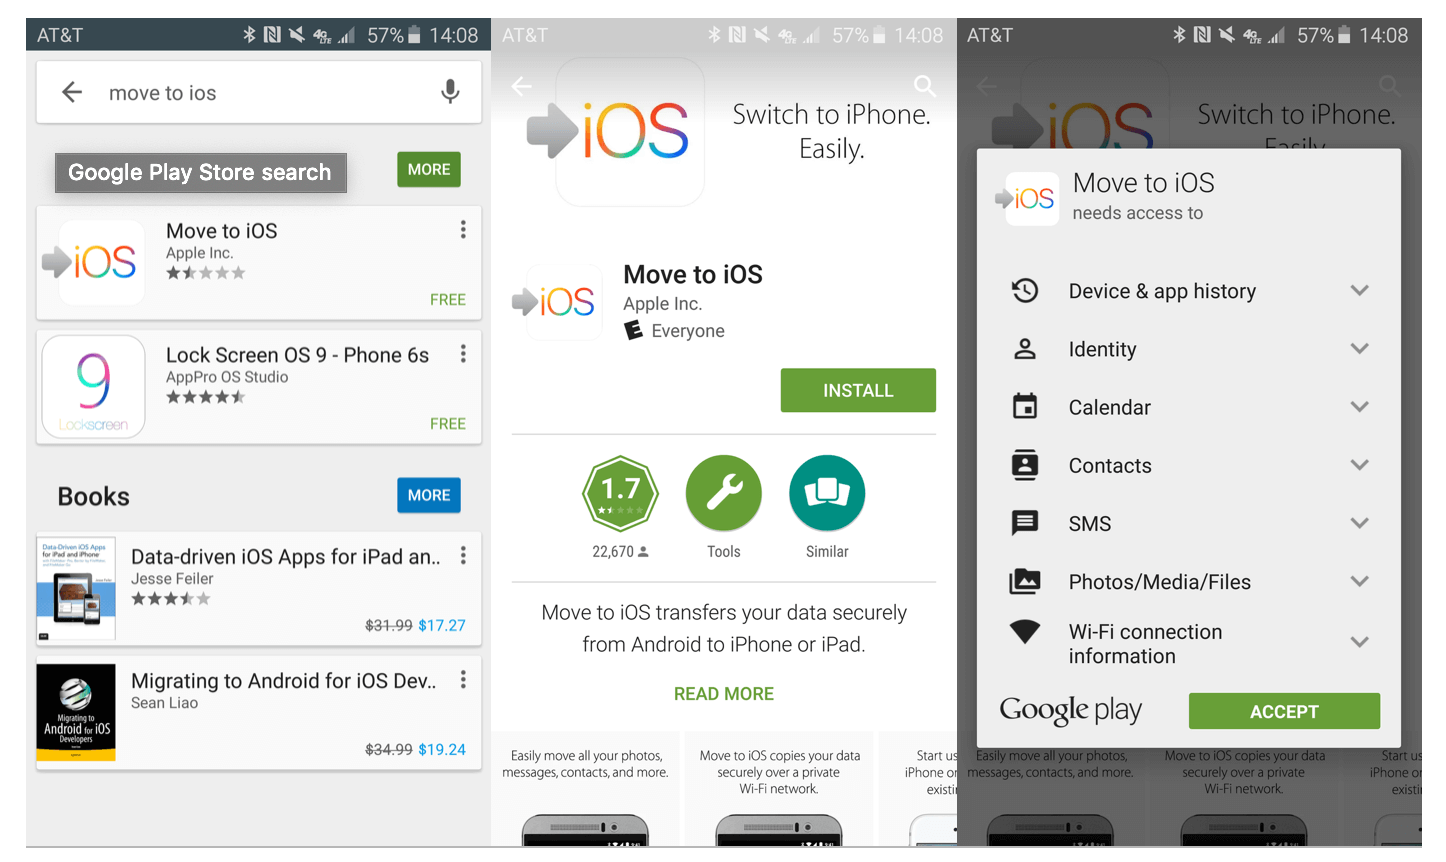 download the Move to iOS